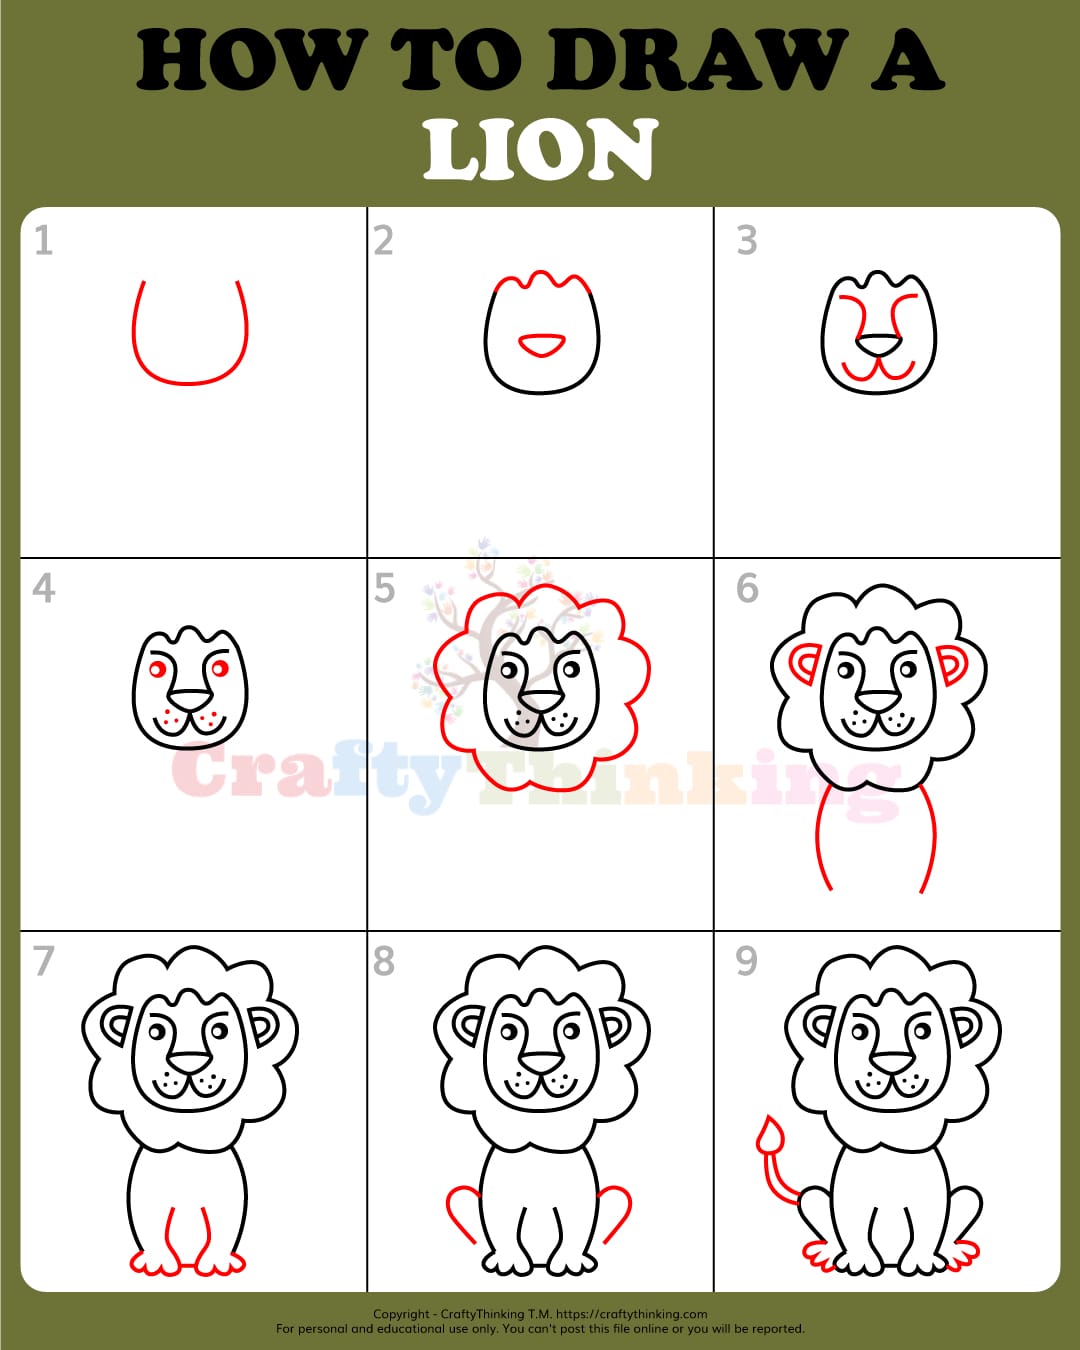 How to Draw a Lion - Step by Step Lion Drawing Tutorial for Beginners ...